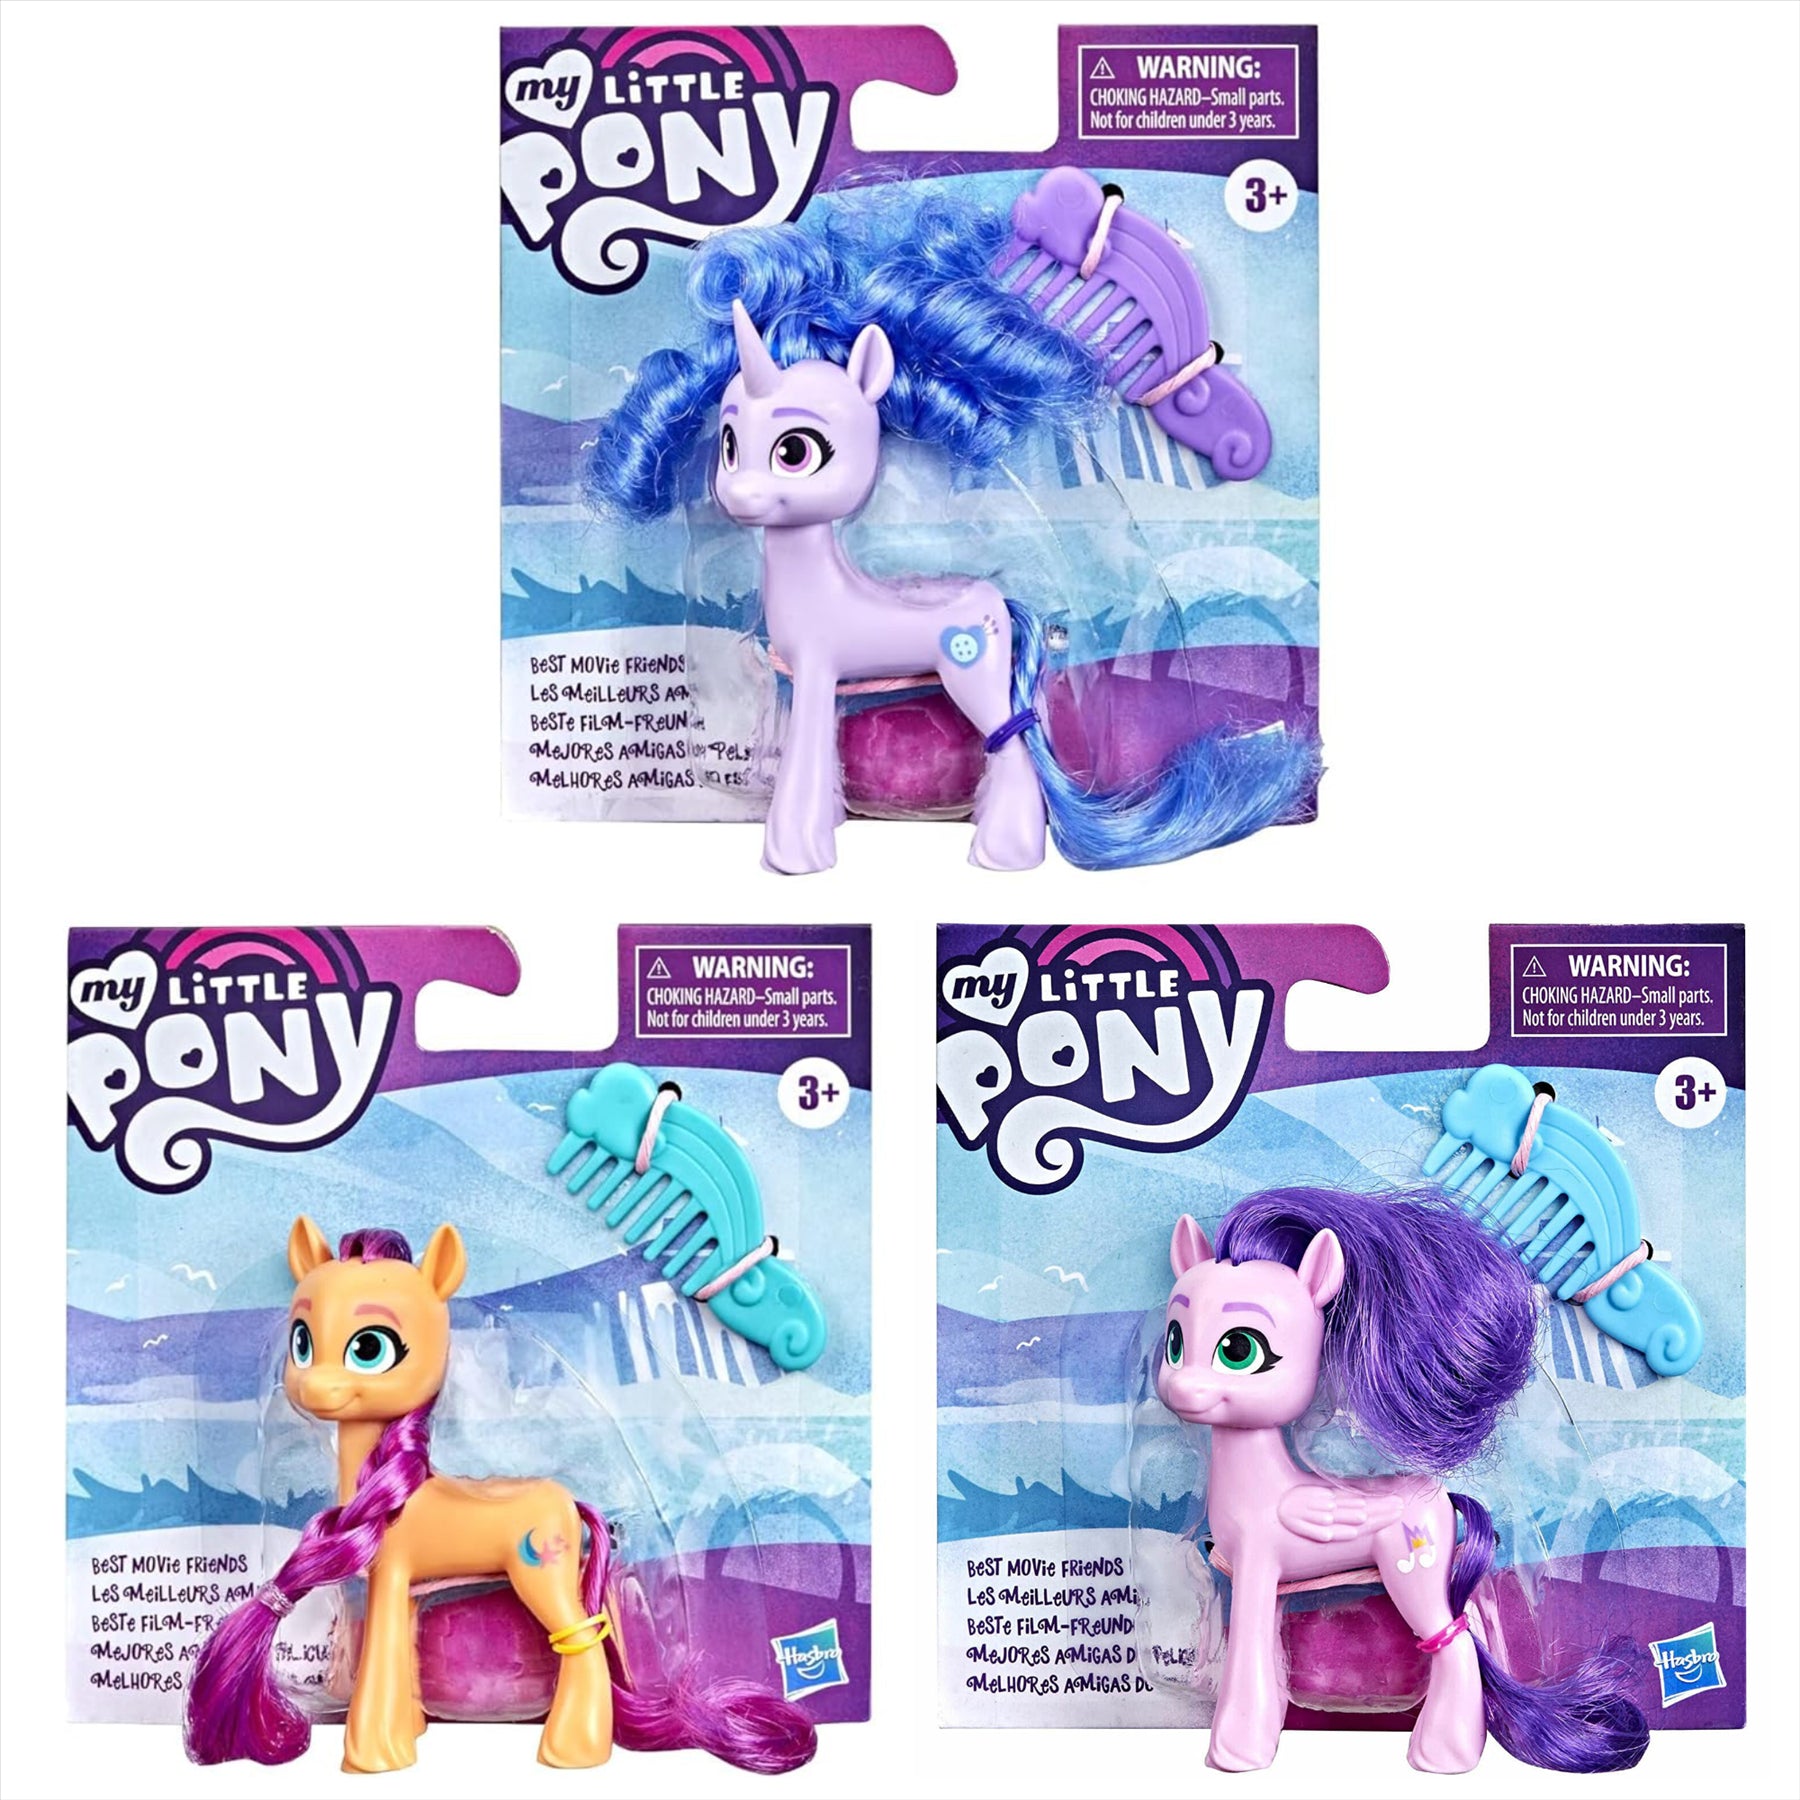 My Little Pony Best Movie Friends - Poseable Articulated Figures with Accessories - Set of All 3 - Toptoys2u